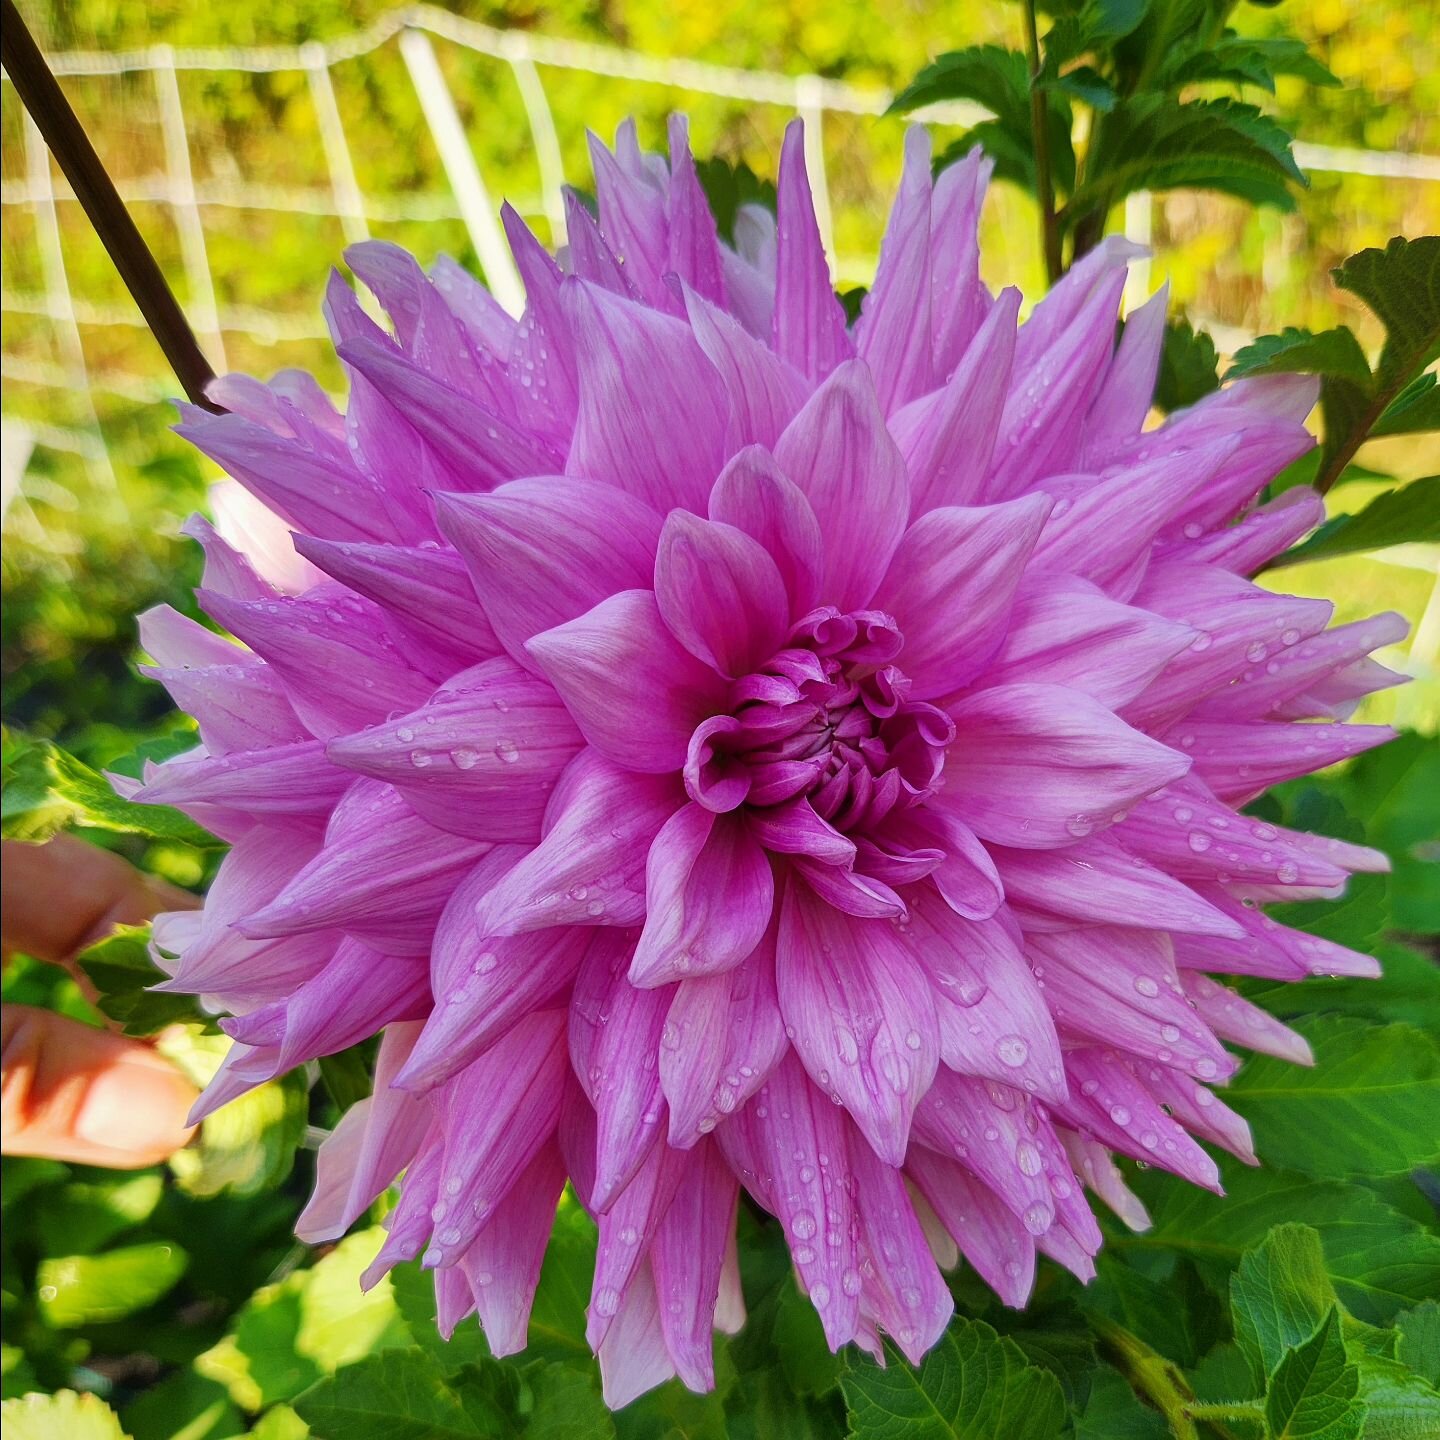 Dahlia 'Lovely Lana' is my favorite #semicactusdahlia to cut from. The blooms are big enough to command attention,  yet not too big to use. Although they border it-a juicy 6&quot; bloom. 

(This one is available on my website for presale 😘)

#dahlia